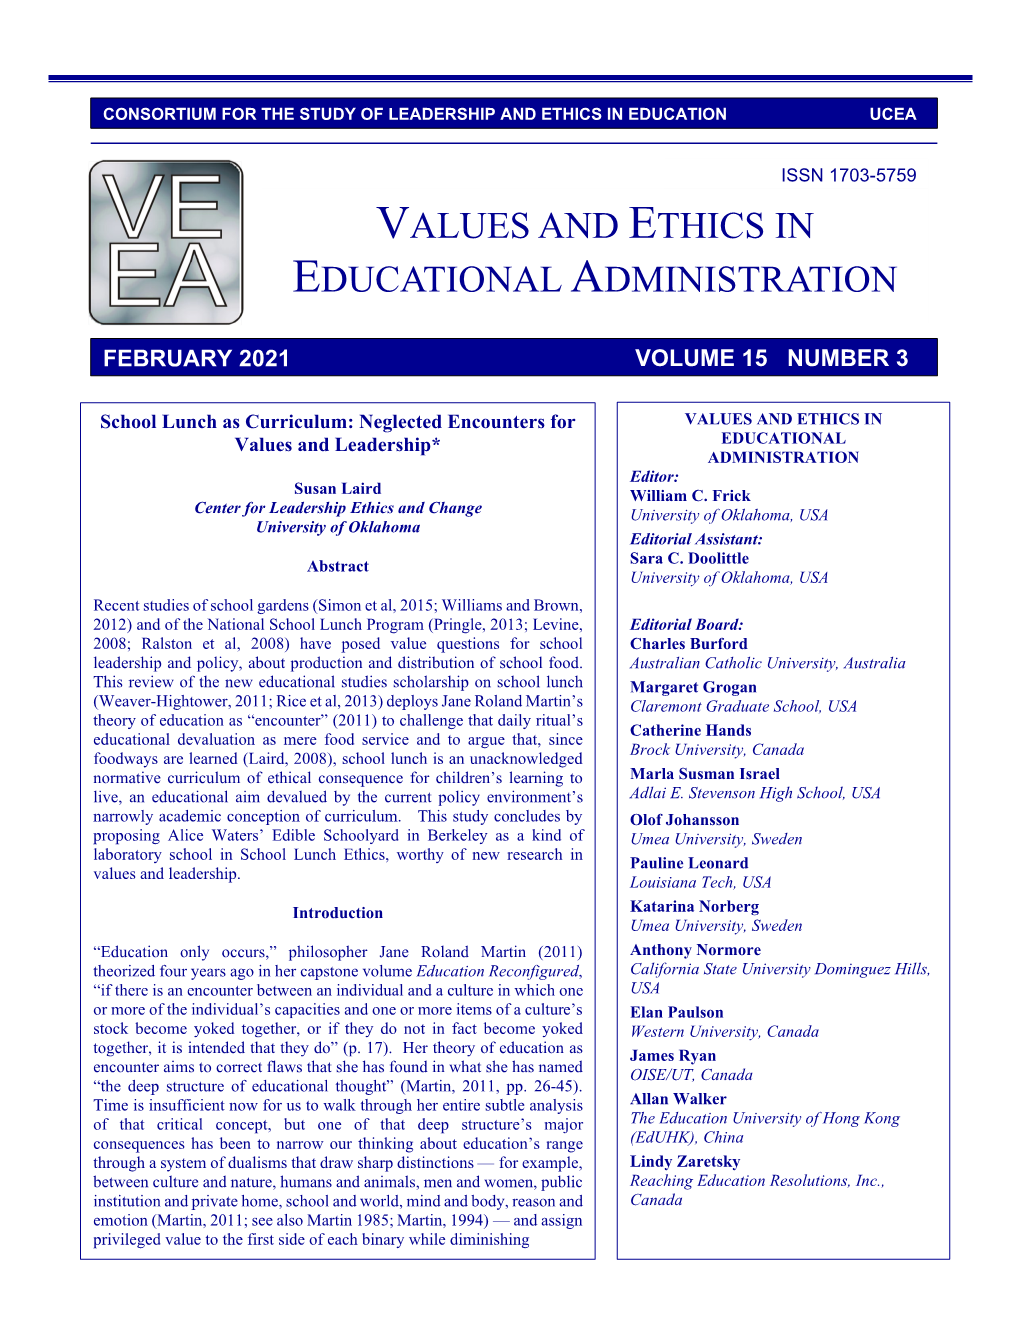 Values and Ethics in Educational Administration